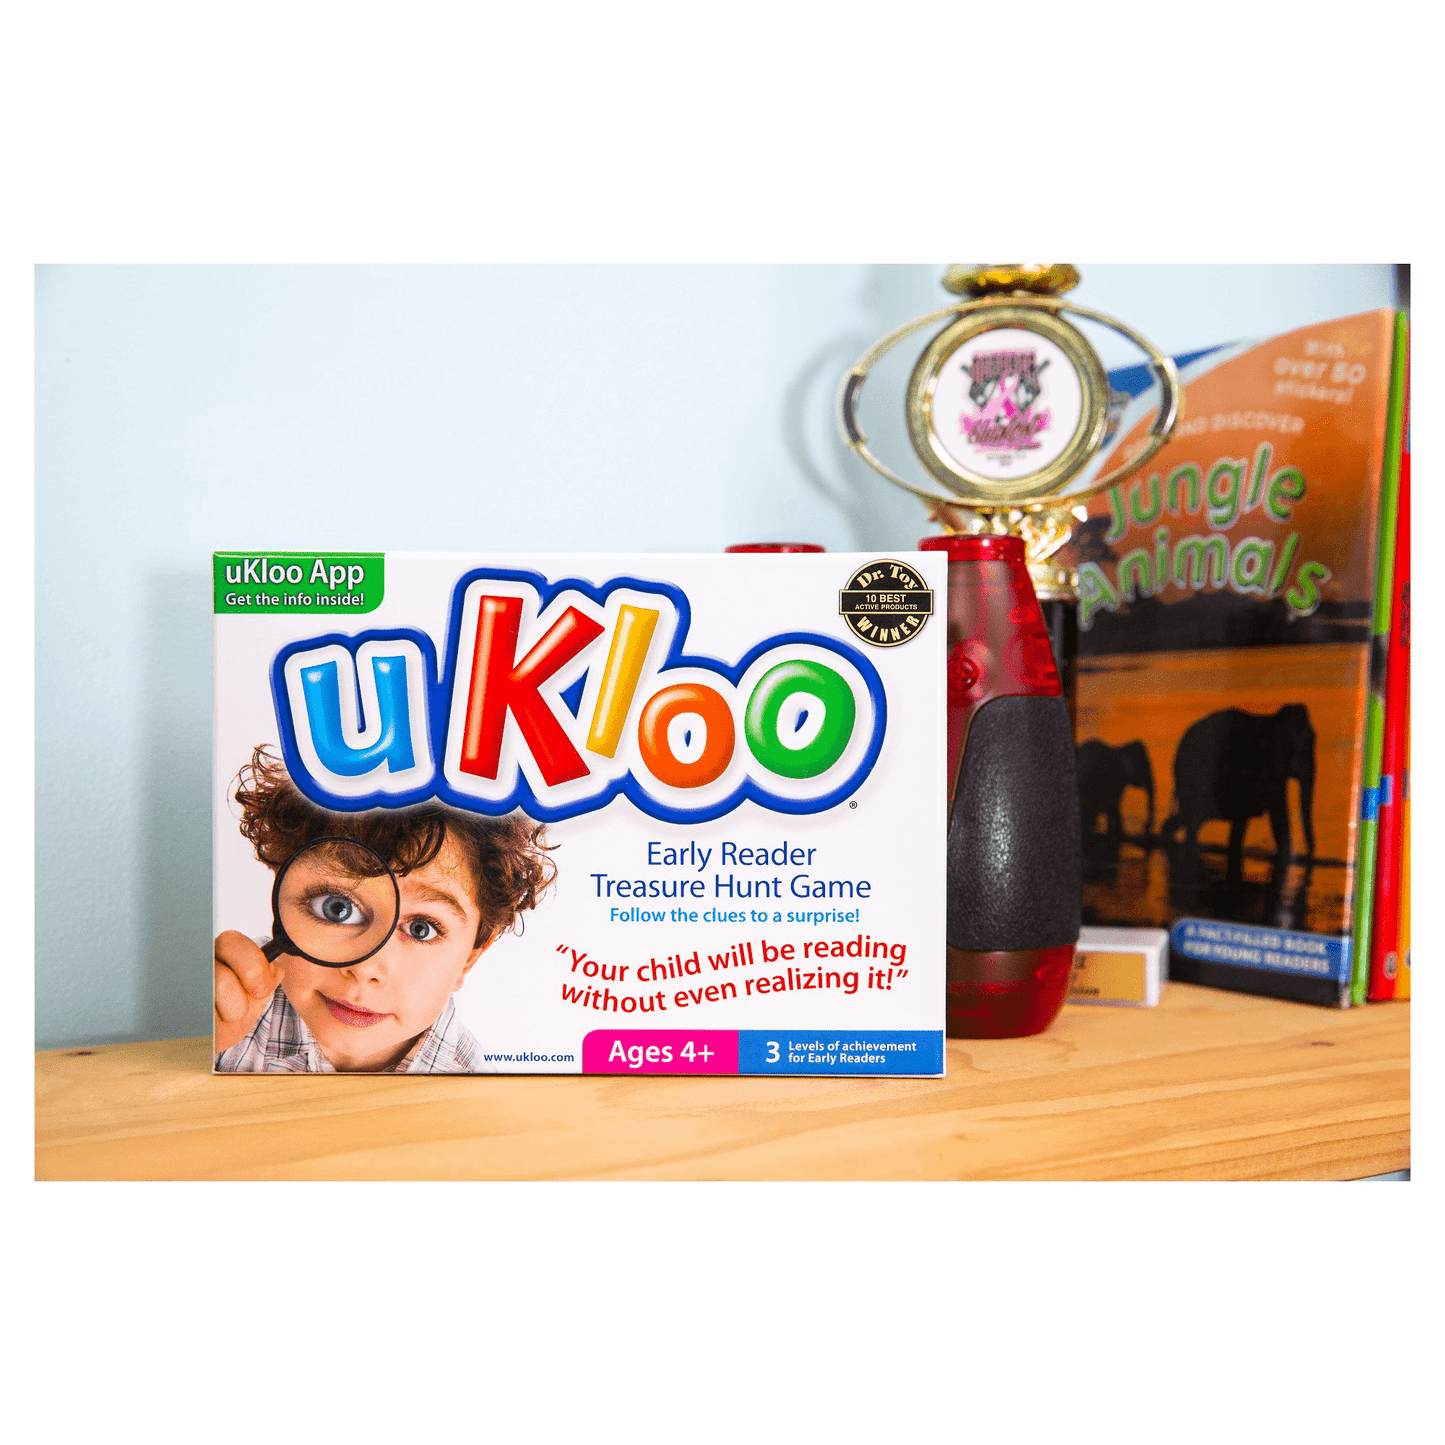 uKloo Early Reader Treasure Hunt Game - Builds Confidence, Promotes Independent Learning and Play